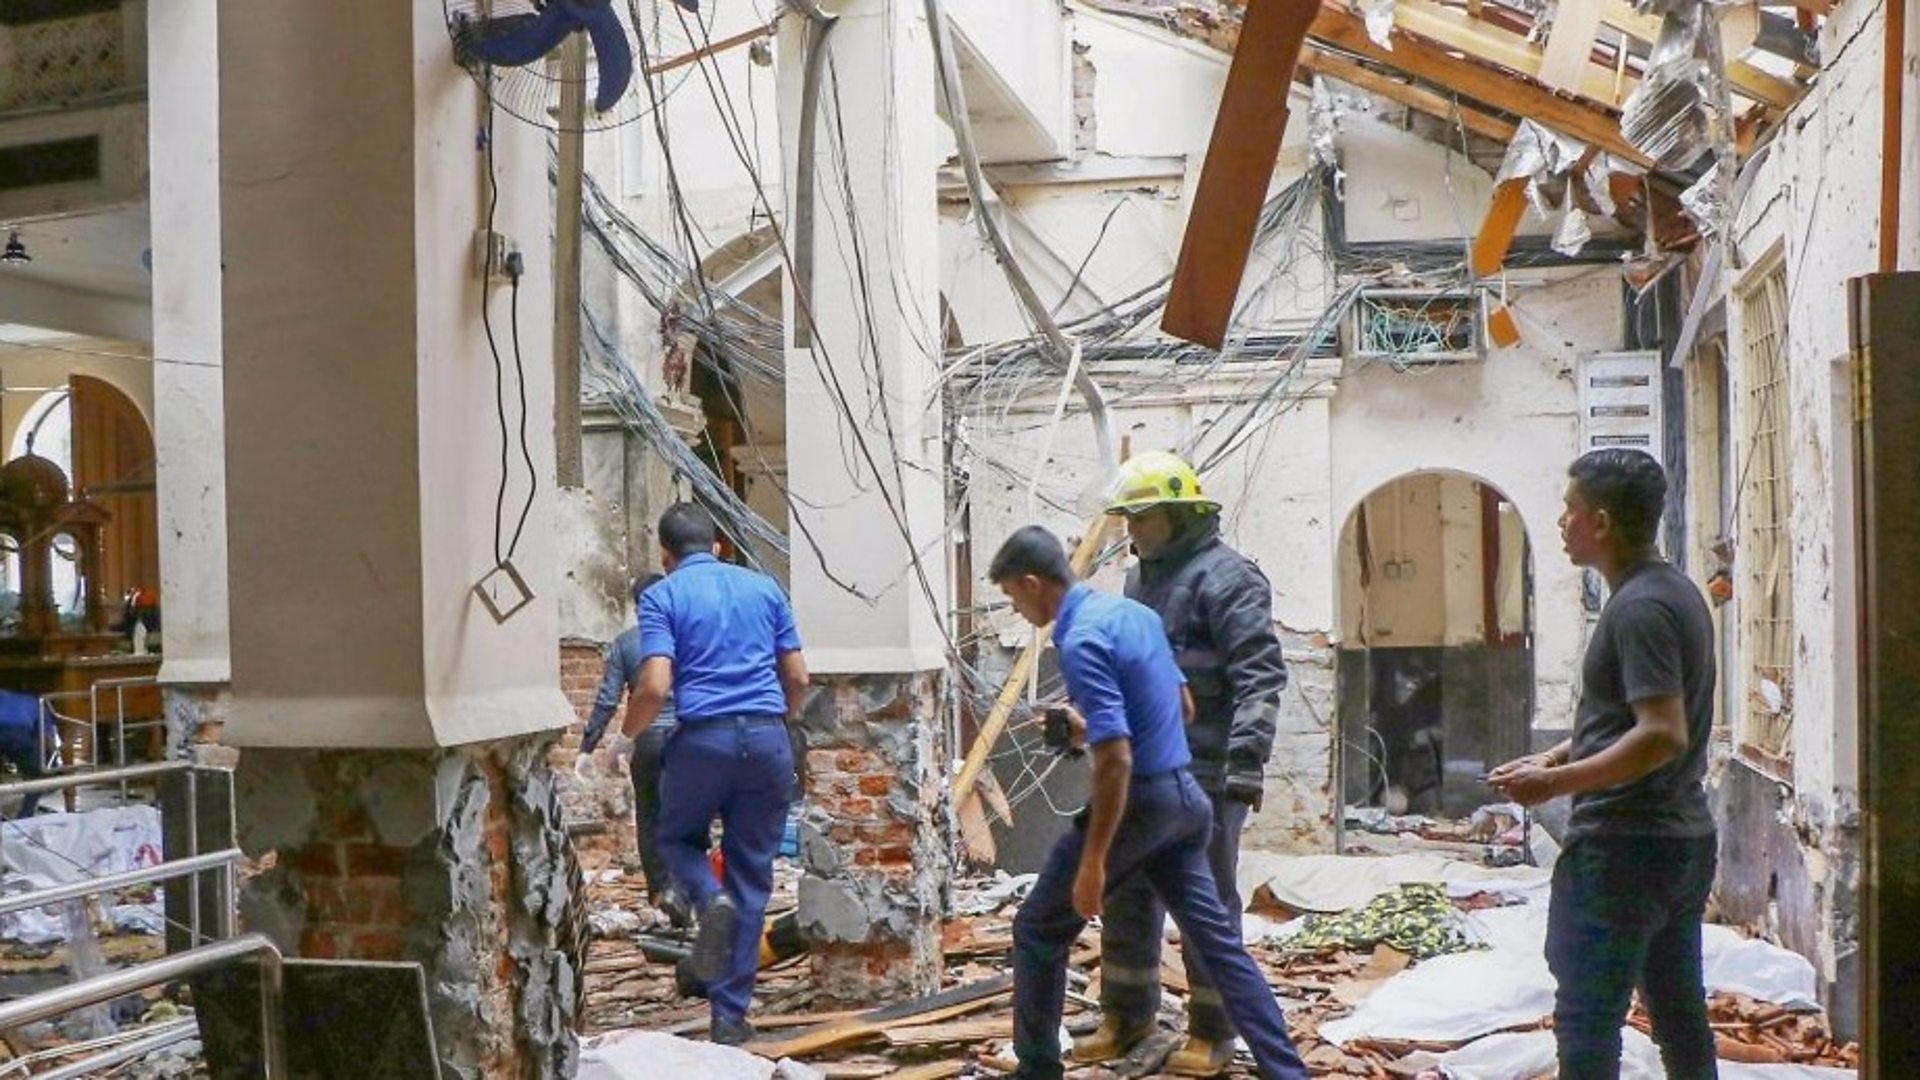 Aftermath of deadly Sri Lanka explosions